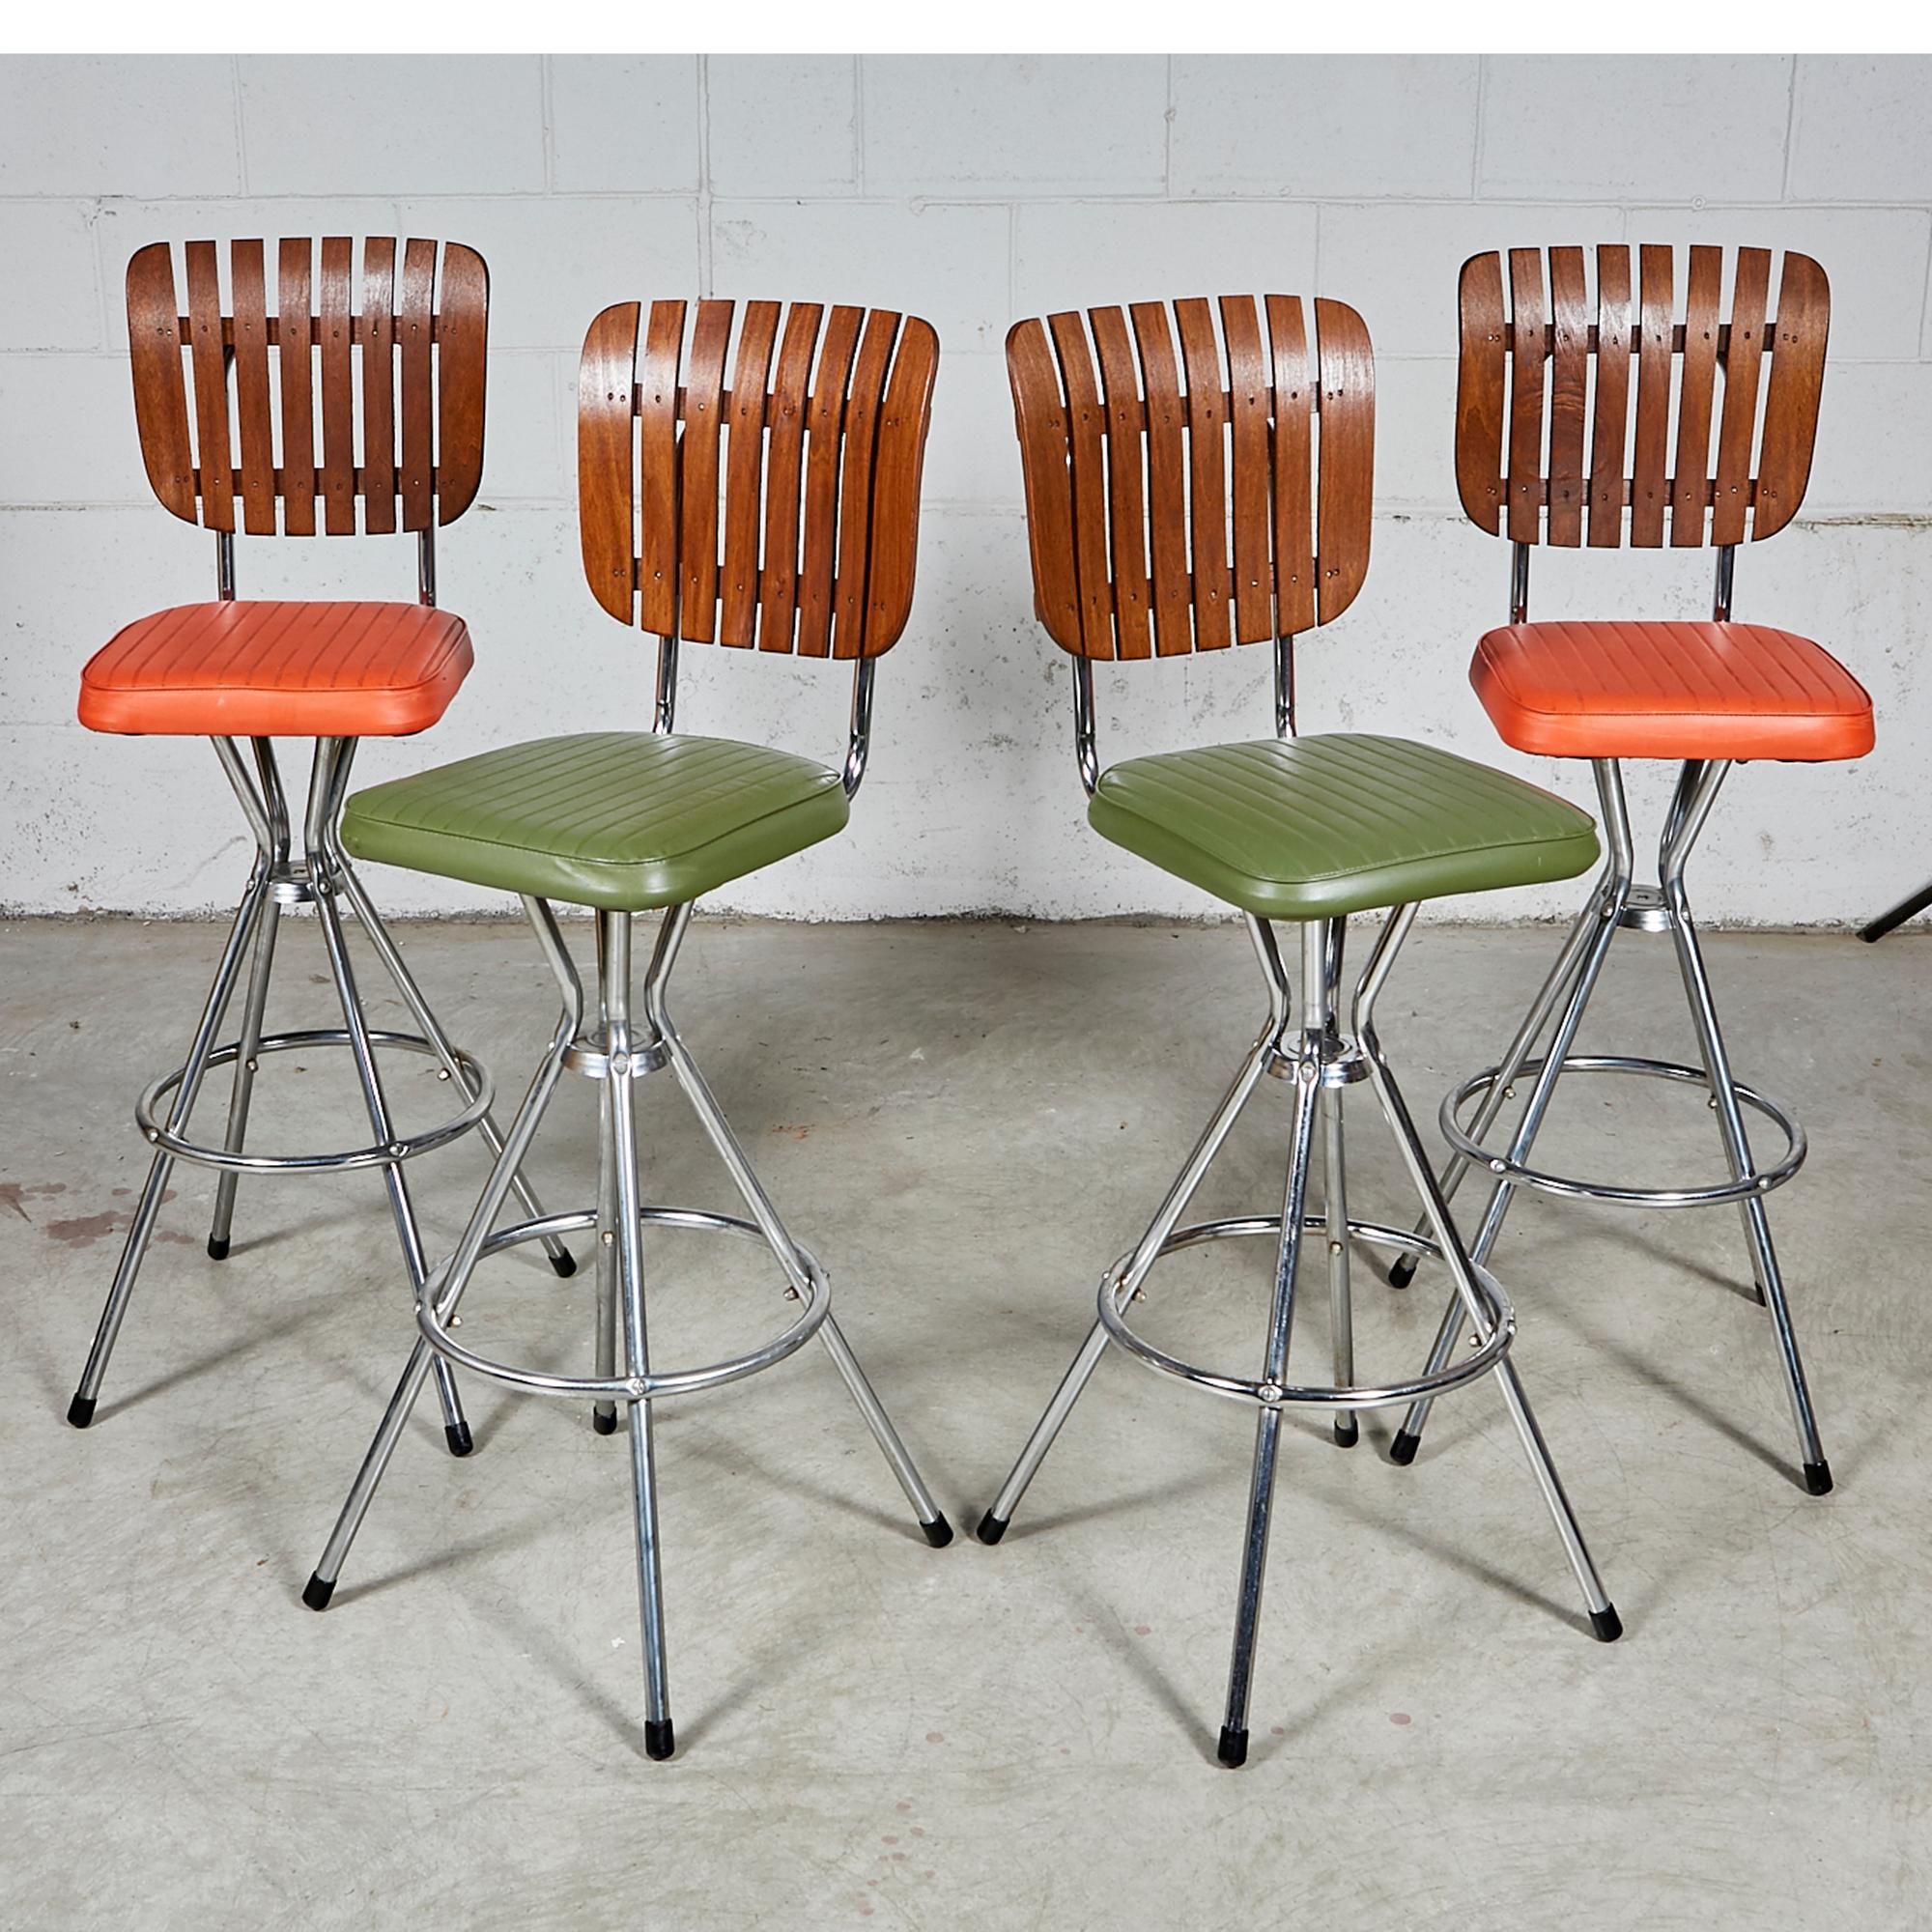 Vintage 1960s set of four high back bar stools with orange and green vinyl seats on a chrome base. In newly refinished condition. Measure: Seat, 29.5 in H. No maker's mark.